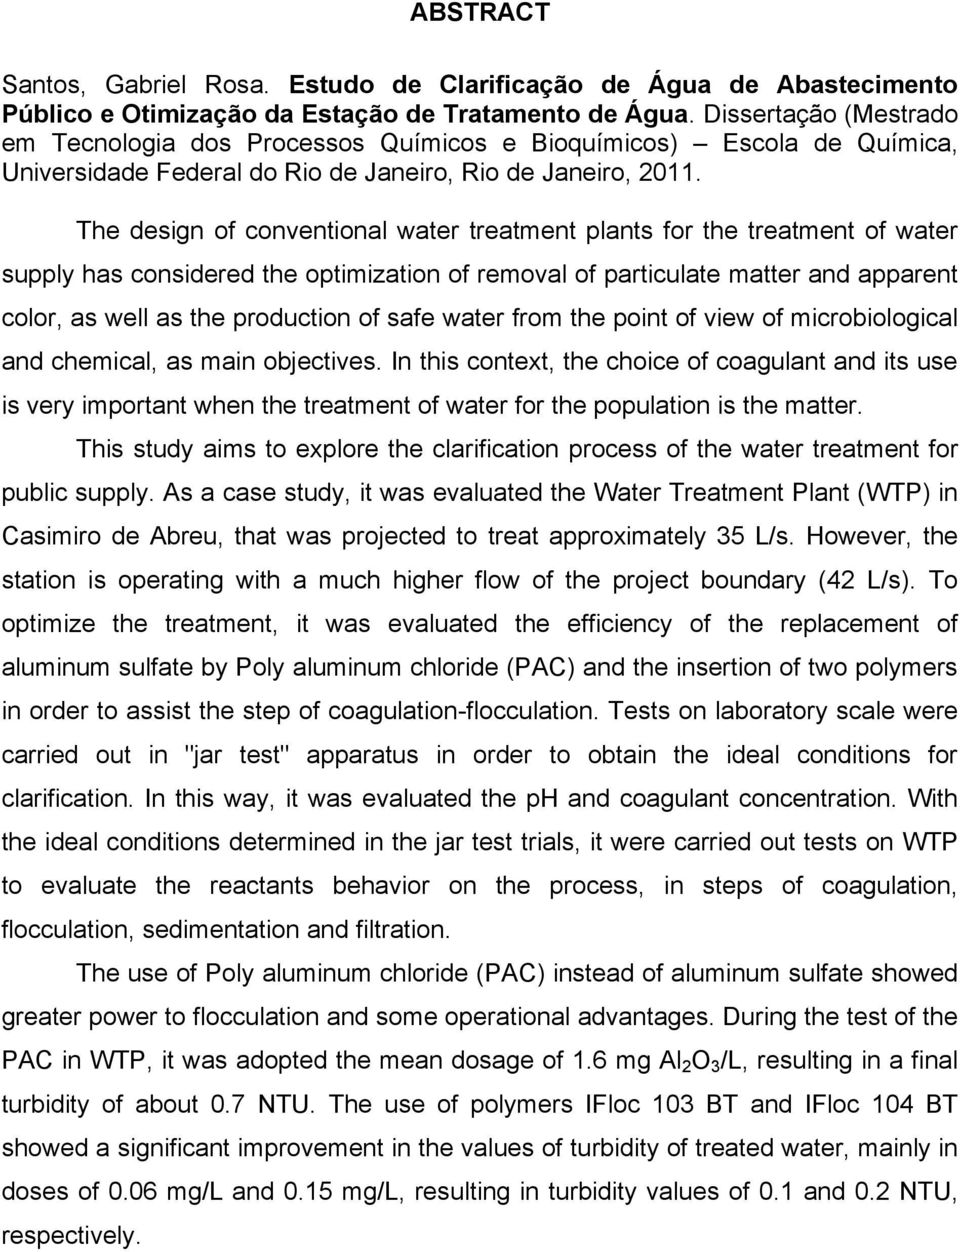 The design of conventional water treatment plants for the treatment of water supply has considered the optimization of removal of particulate matter and apparent color, as well as the production of